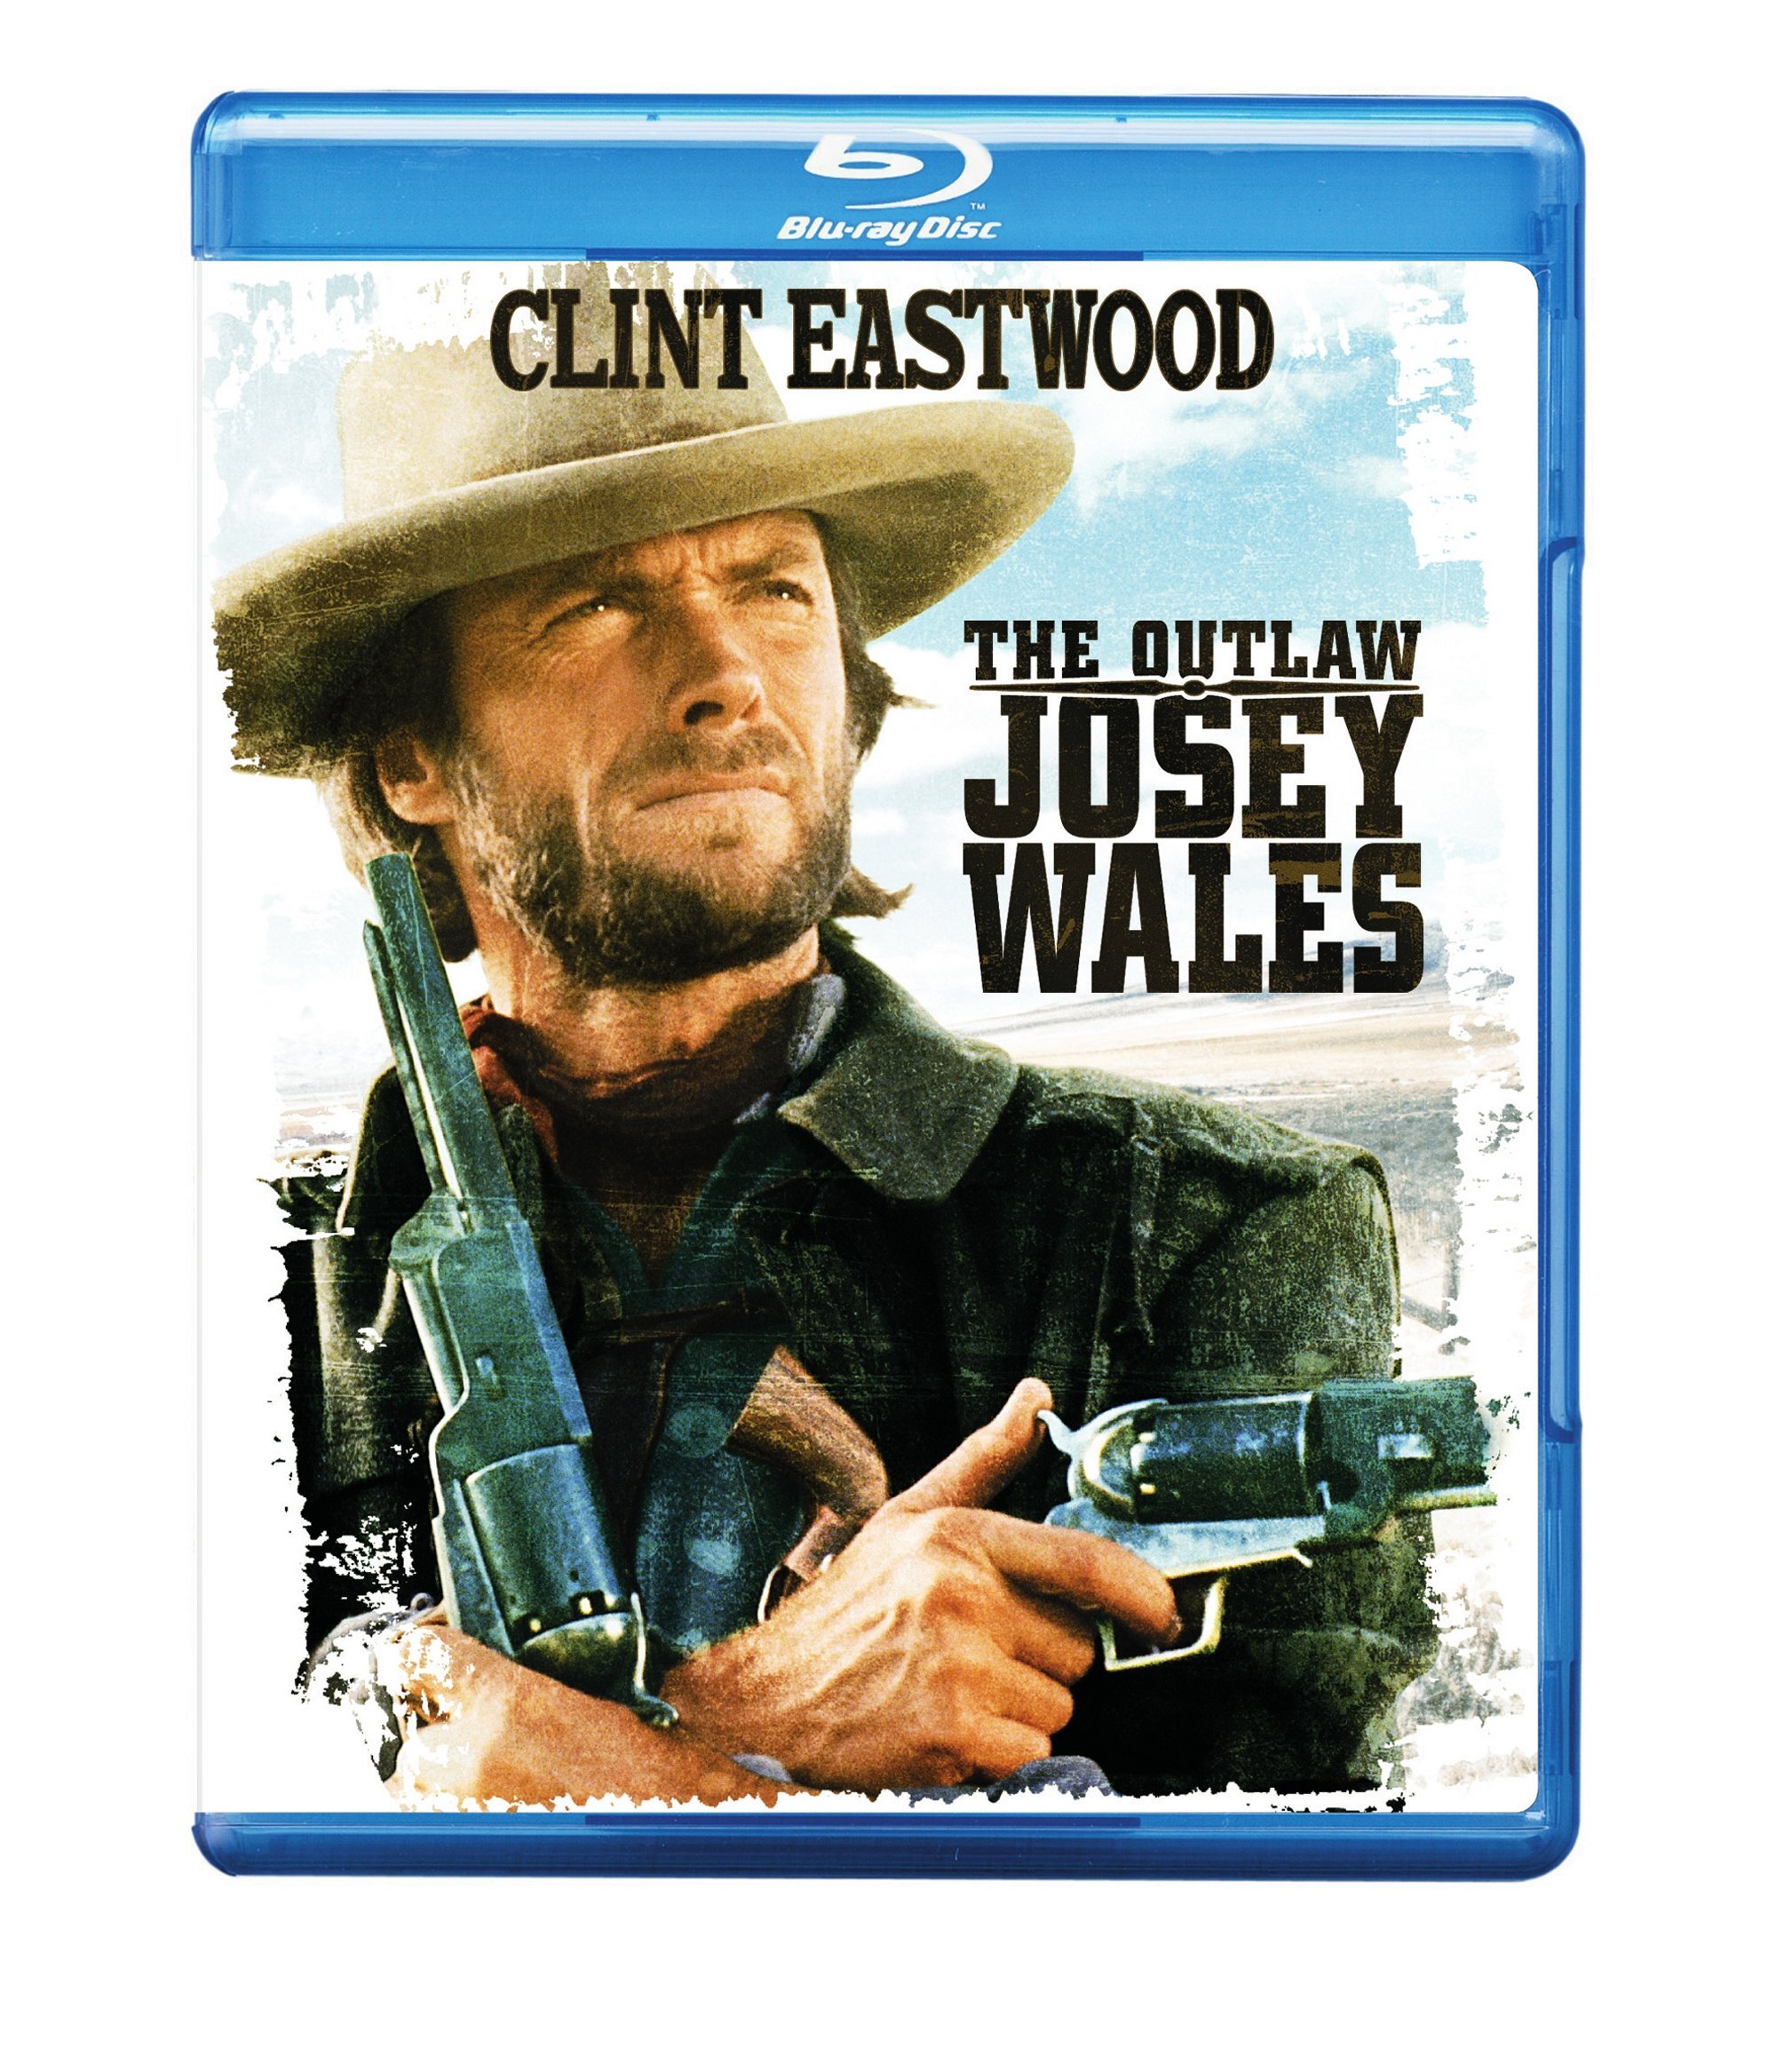 The Outlaw Josey Wales - Blu-ray [ 1976 ]  - Western Movies On Blu-ray - Movies On GRUV